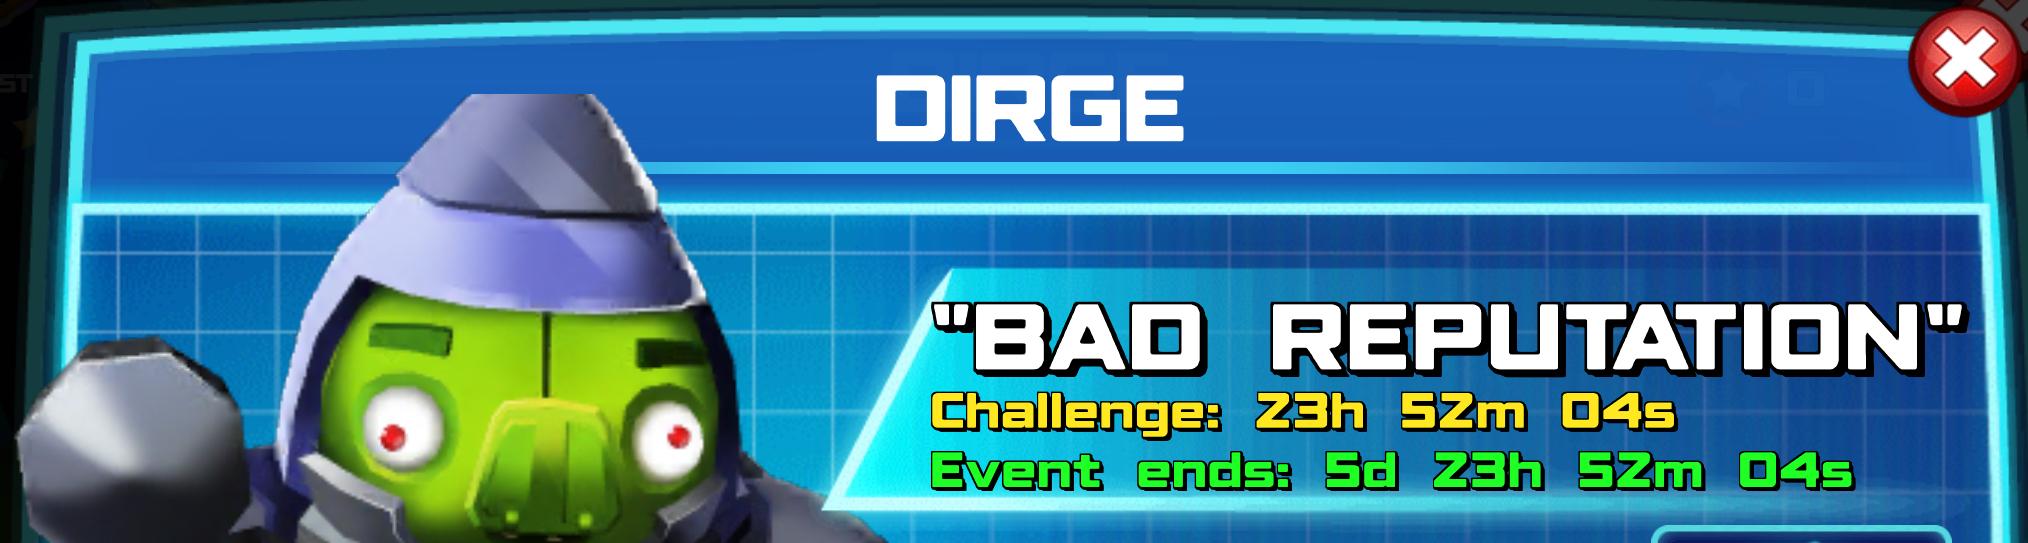 (Part of) The event banner for Dirge (Bad Reputation)